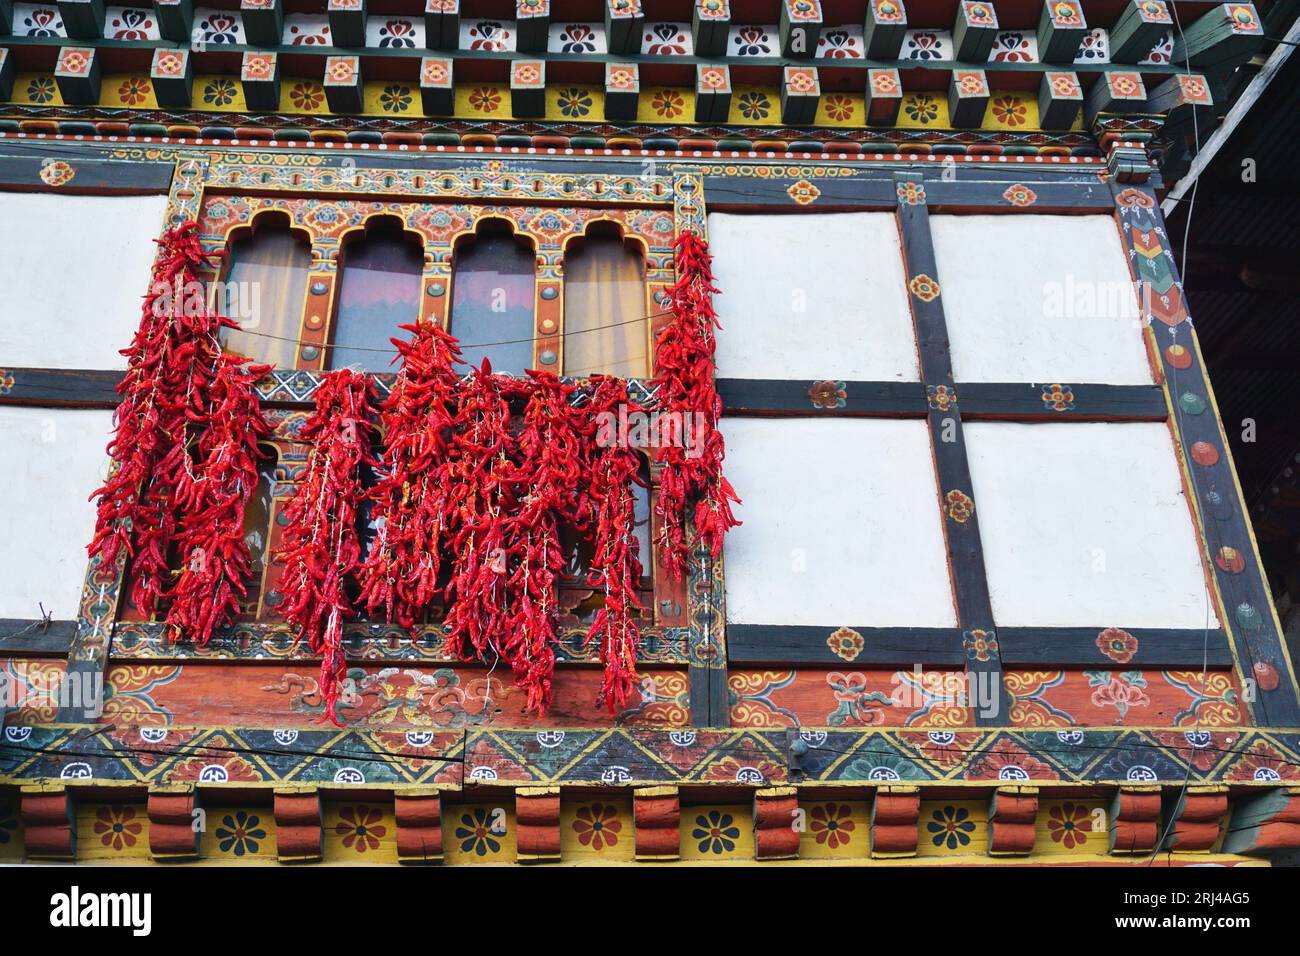 Strings of bright red hot chili peppers hanging to dry from traditional colorful painted wood Bhutanese rabsel window frames in Paro, Bhutan. Stock Photo